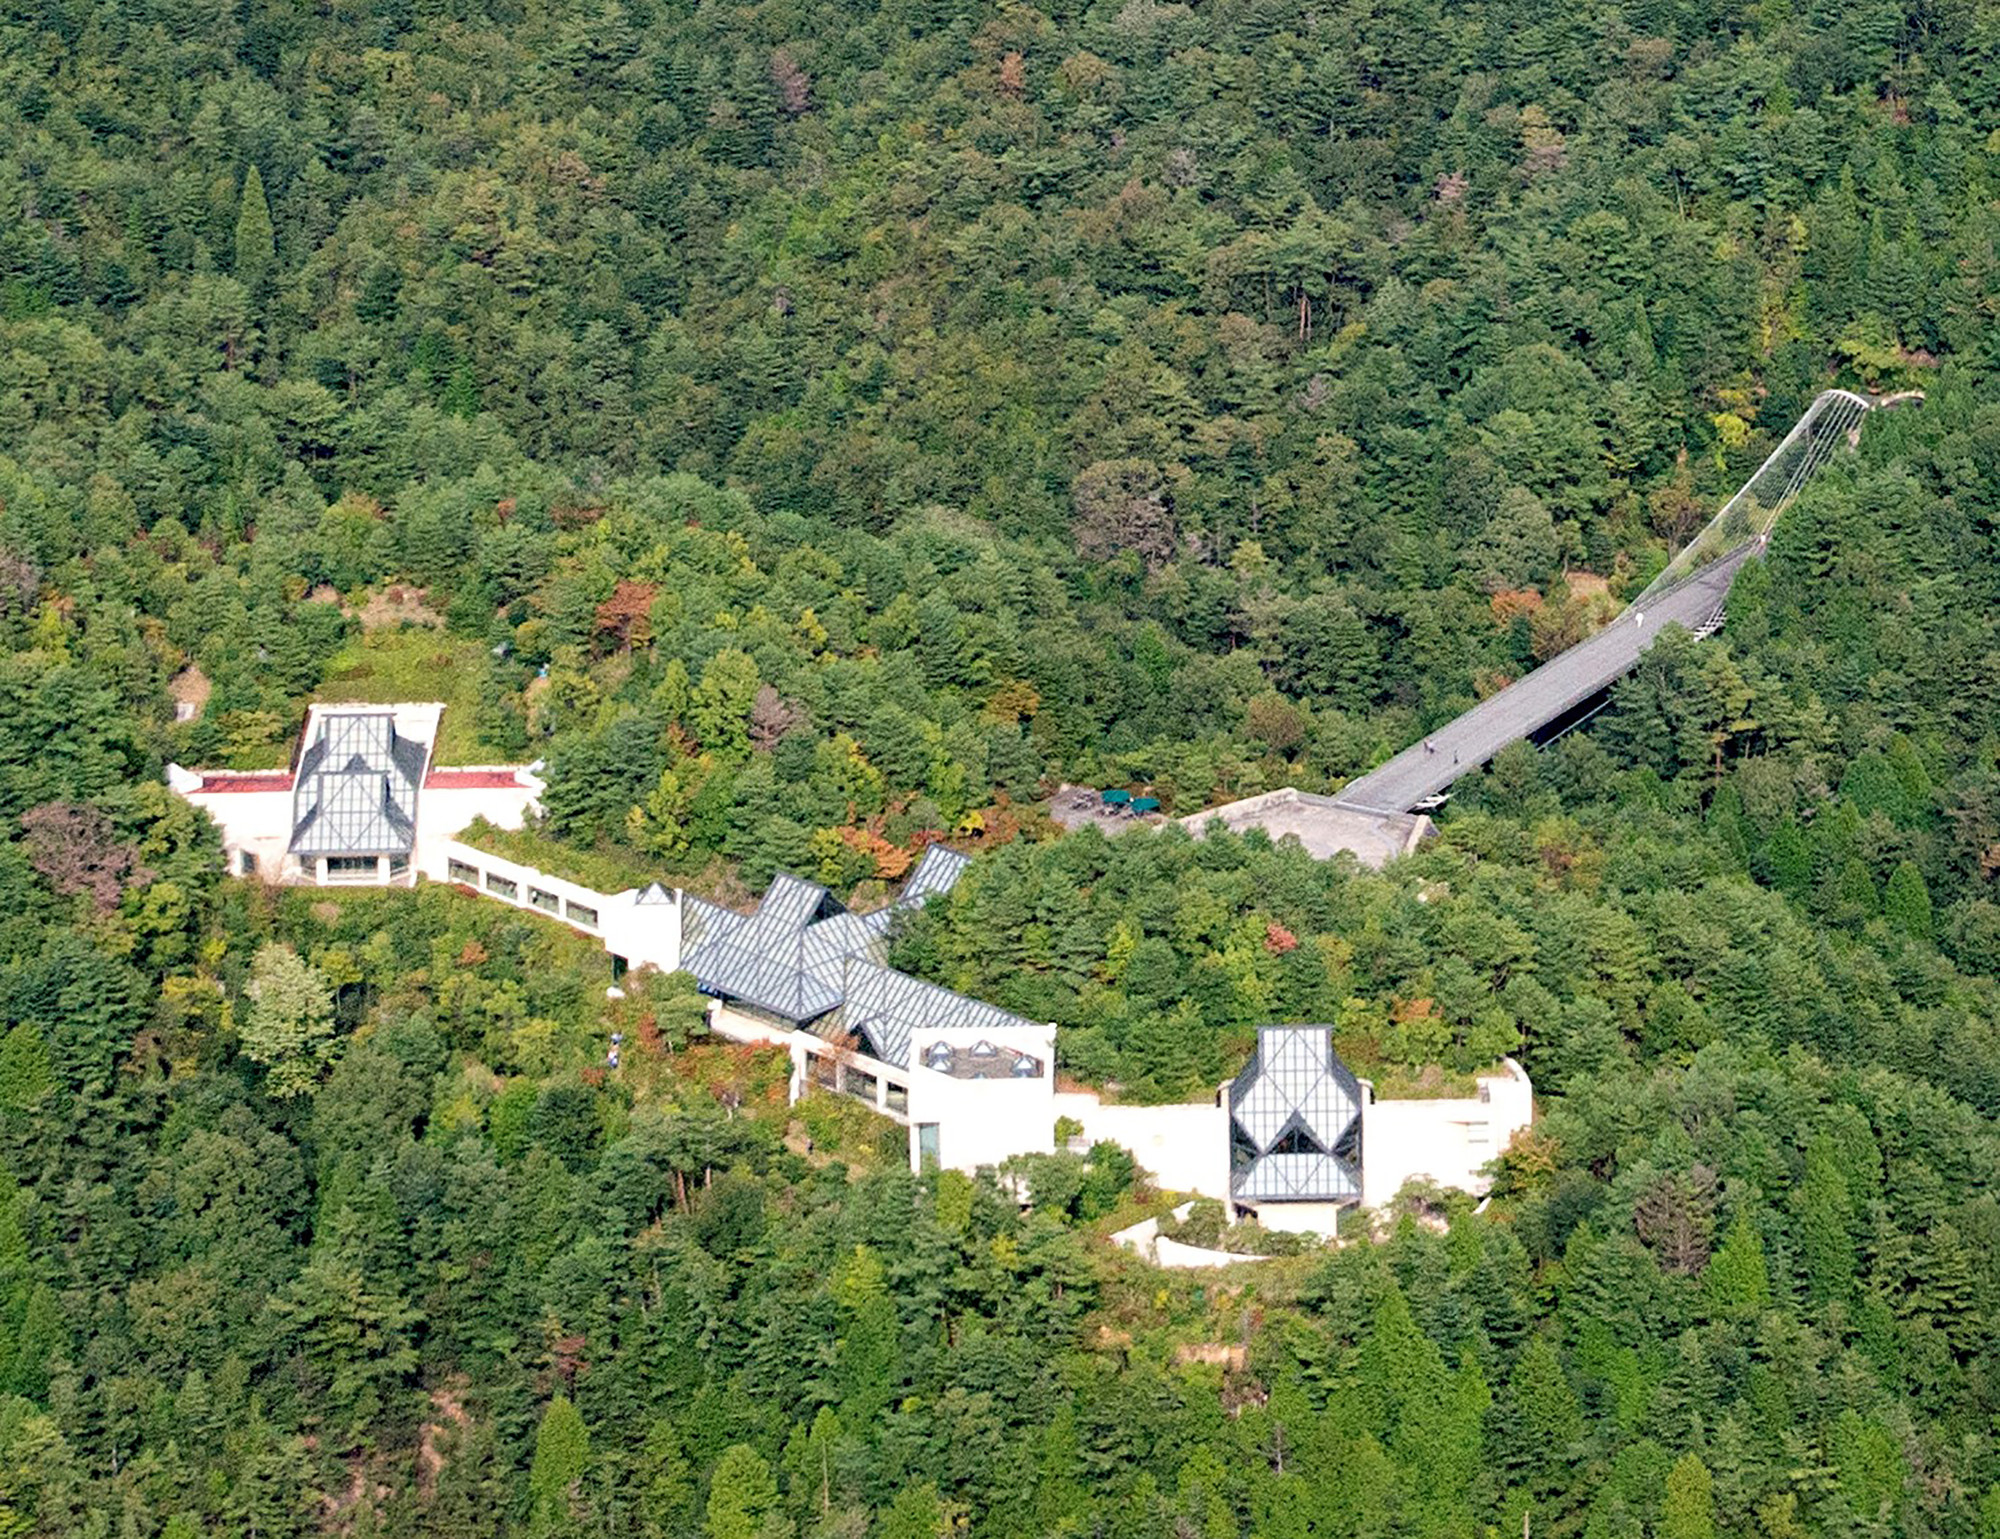 The Miho Museum designed by I.M. Pei